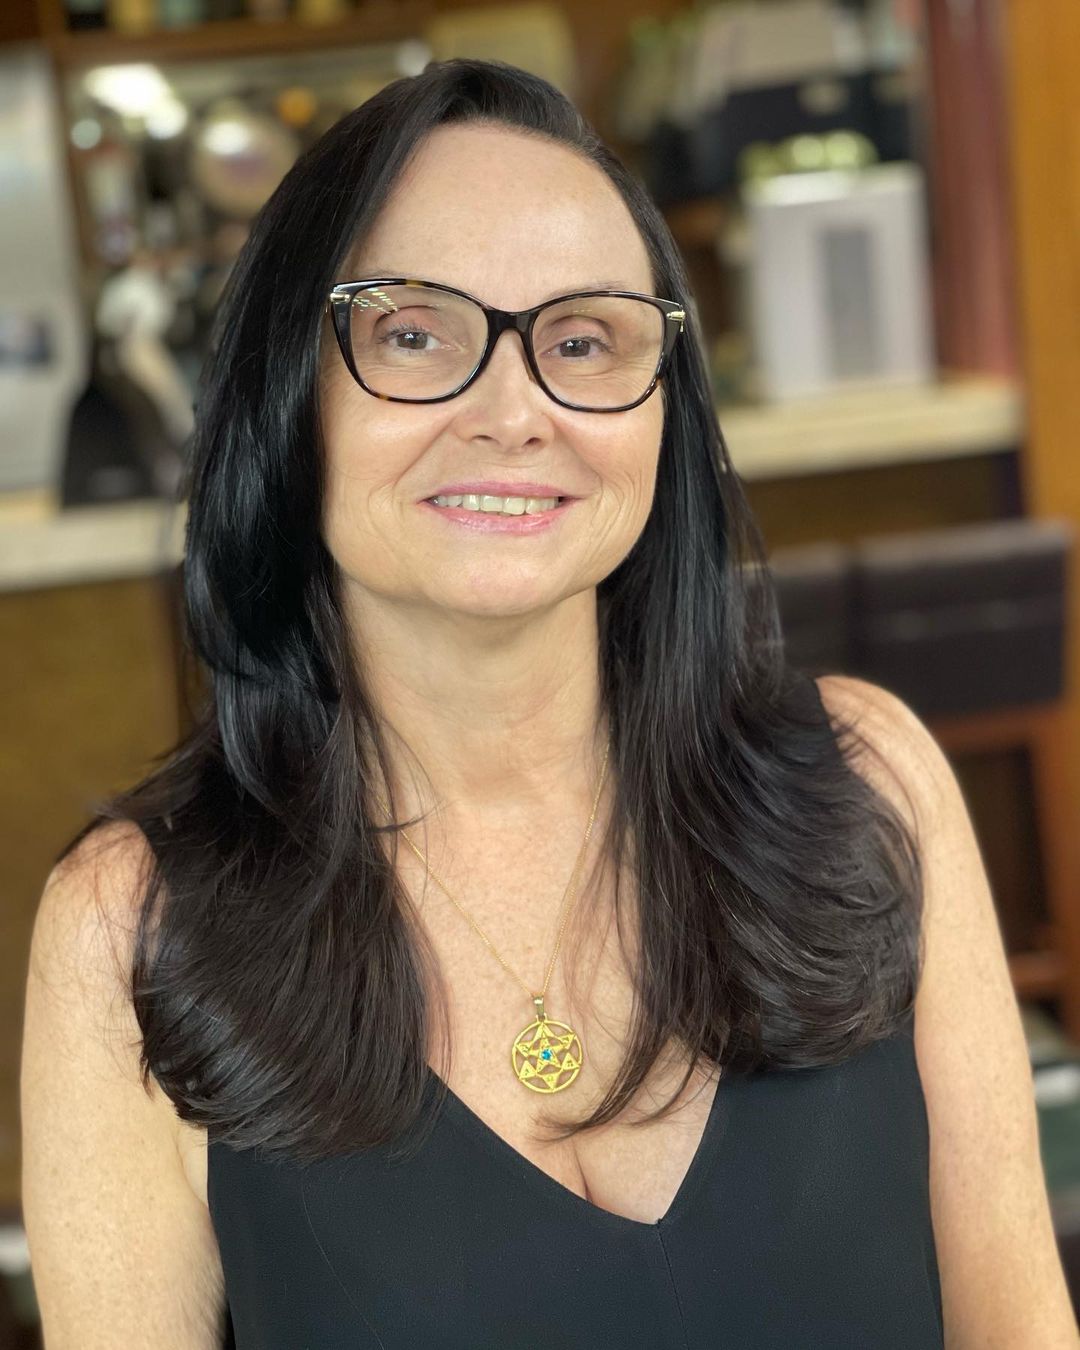 Long Dark Layered Hair for Older Women with Glasses